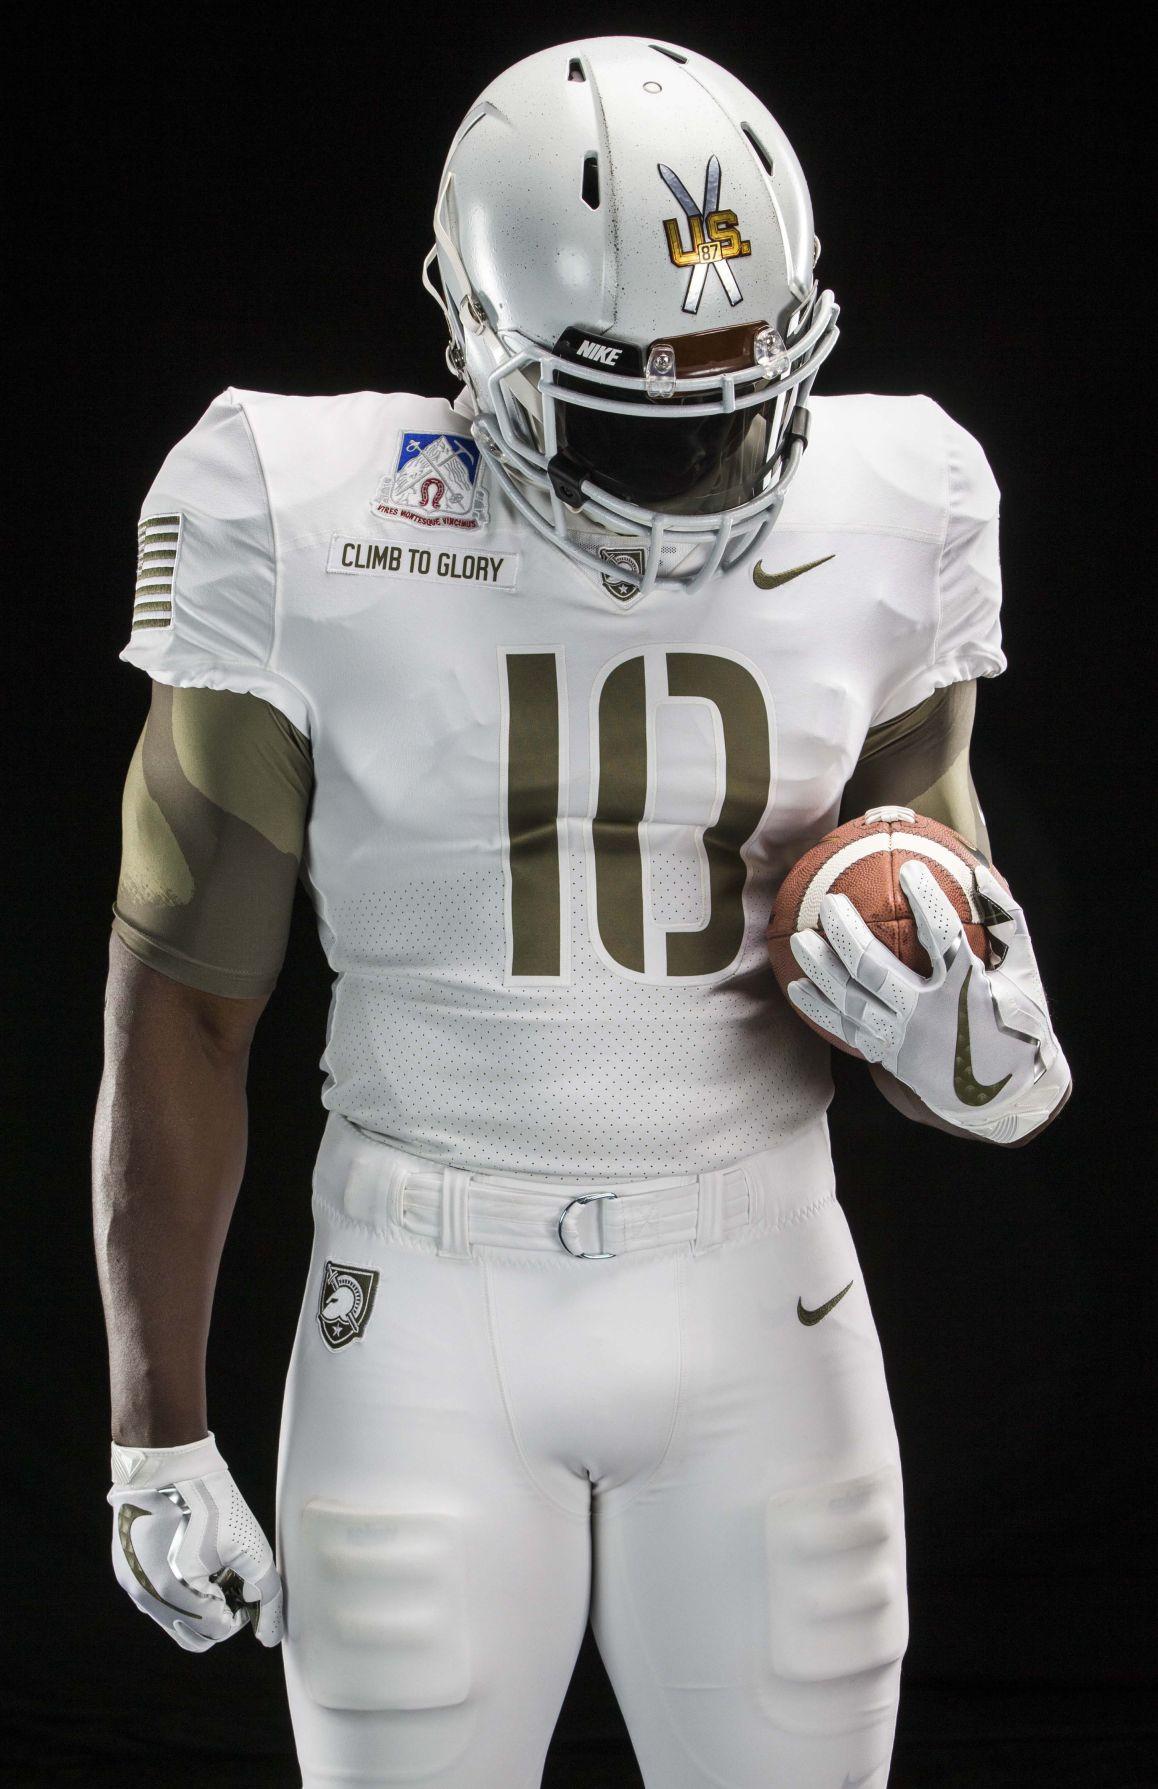 Army uniforms for Navy game to honor famed division Sports